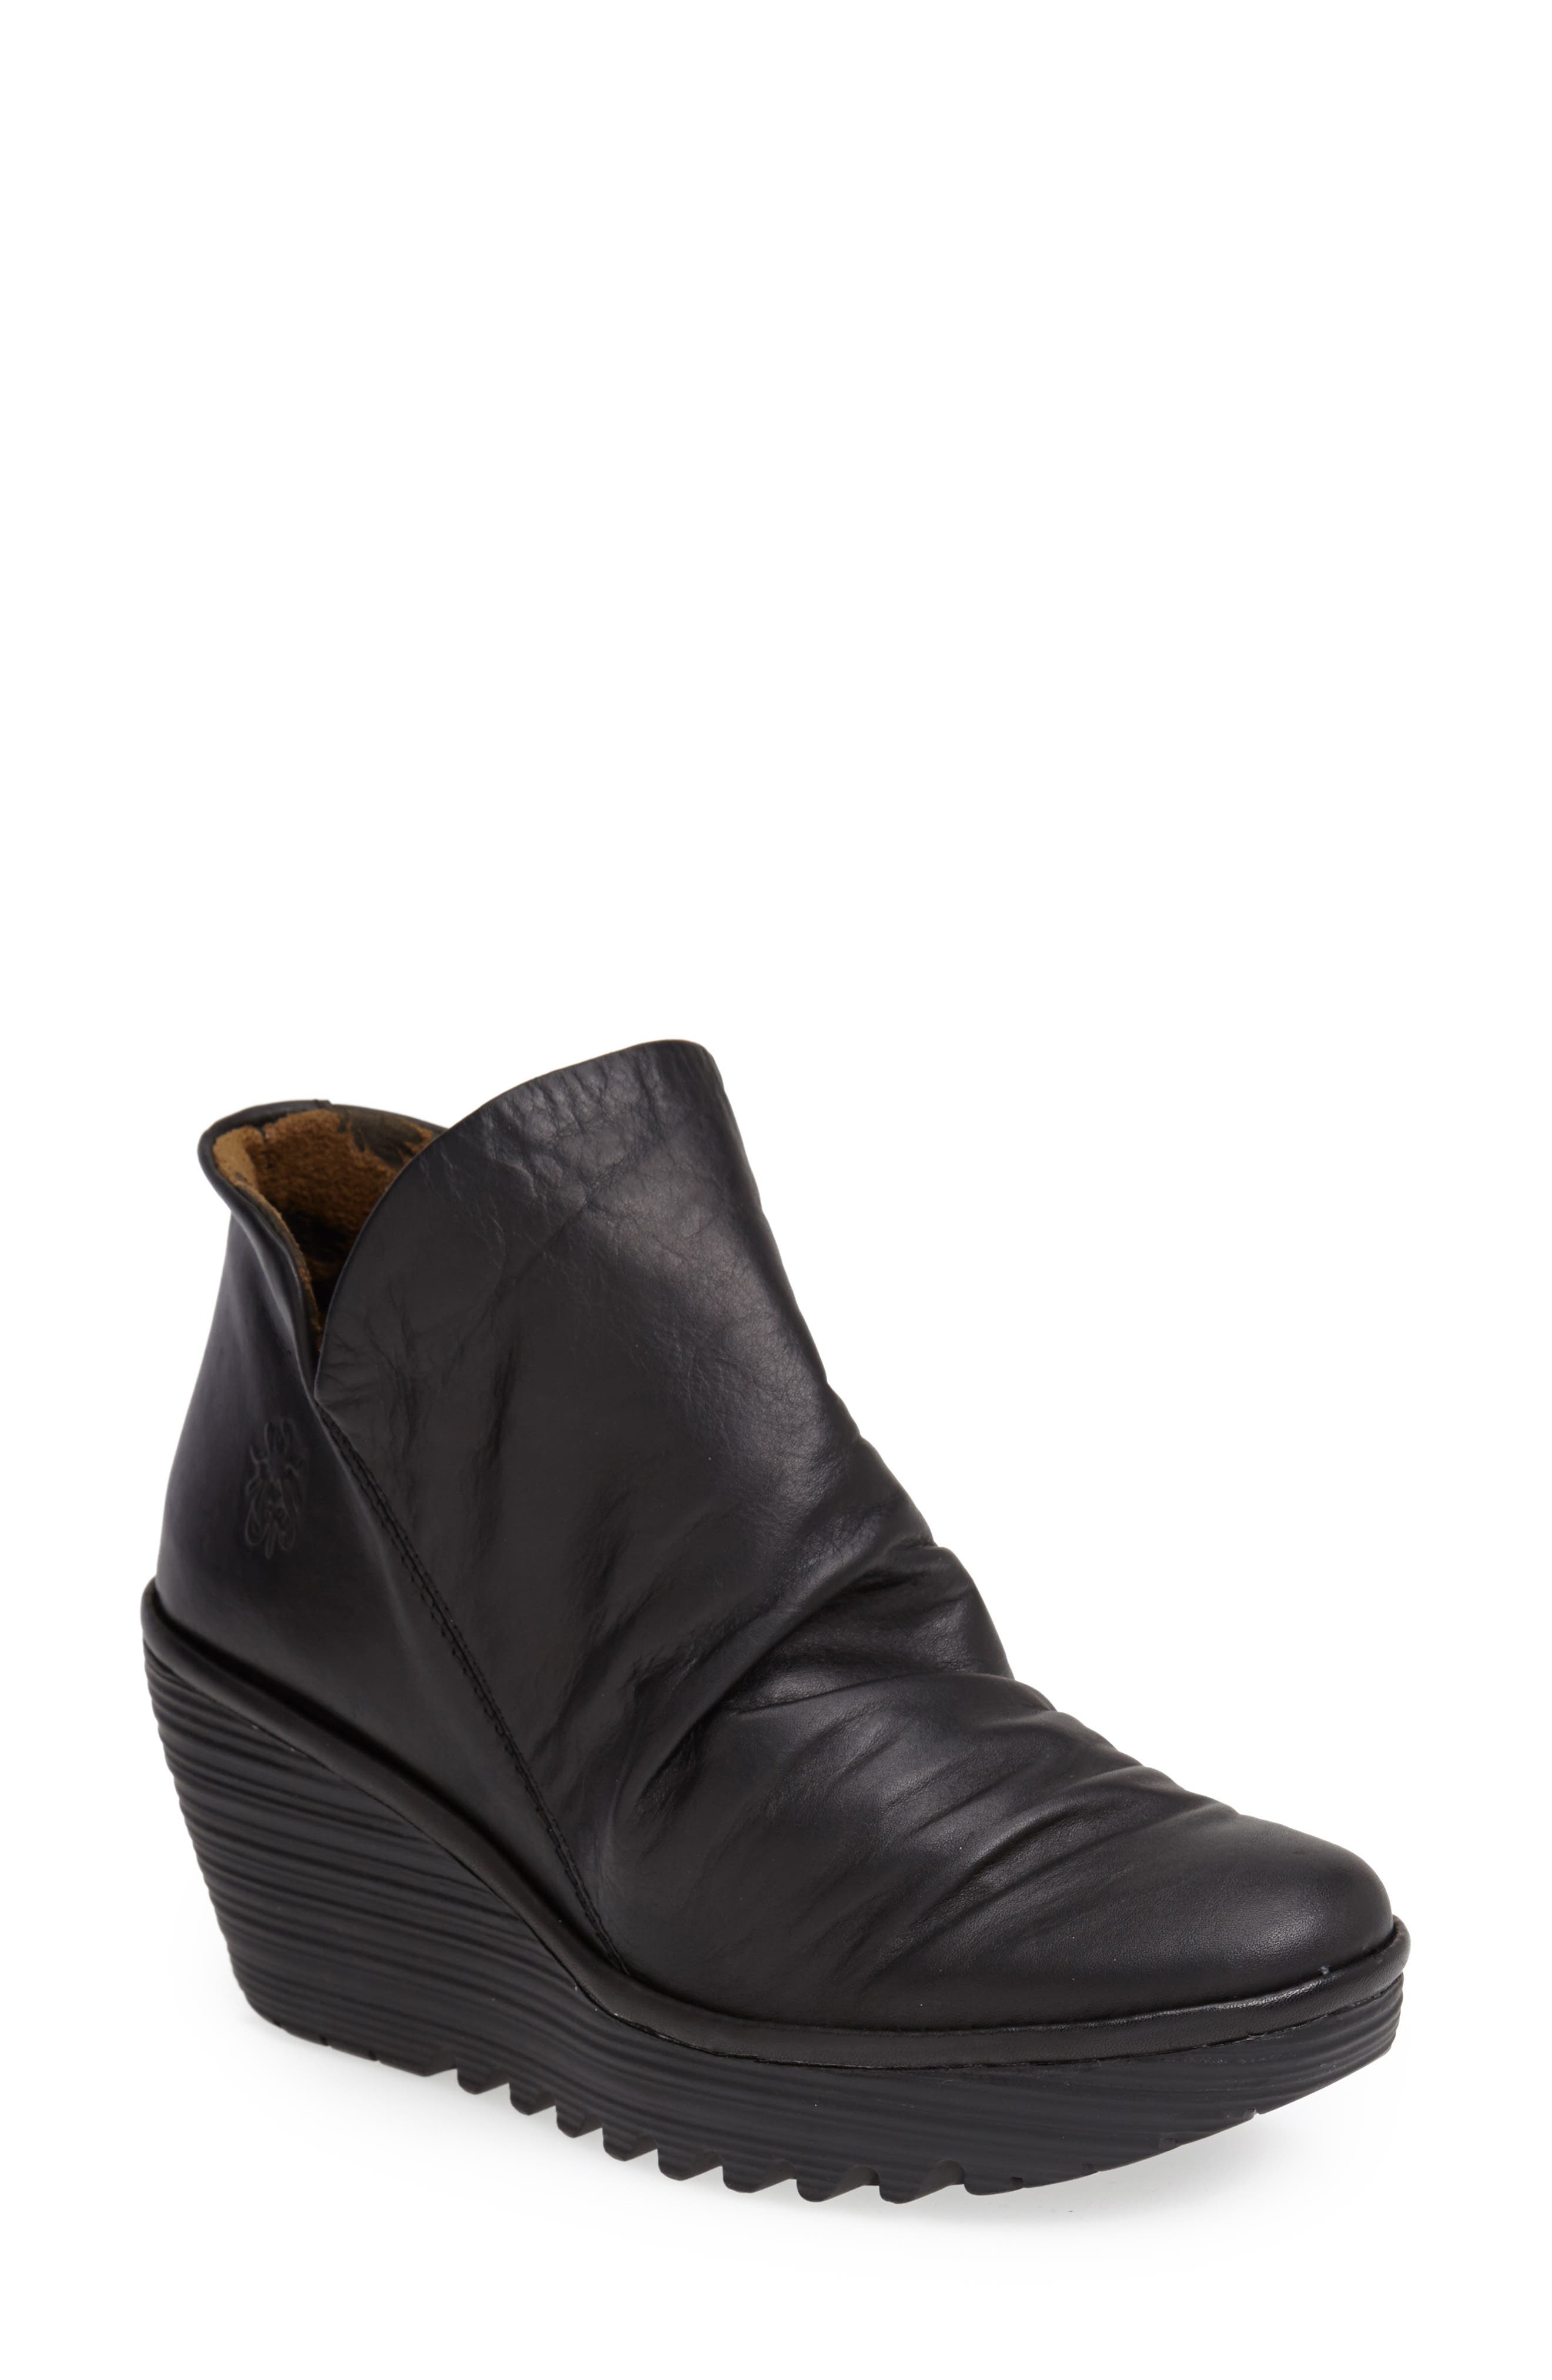 fly london yip women's boots